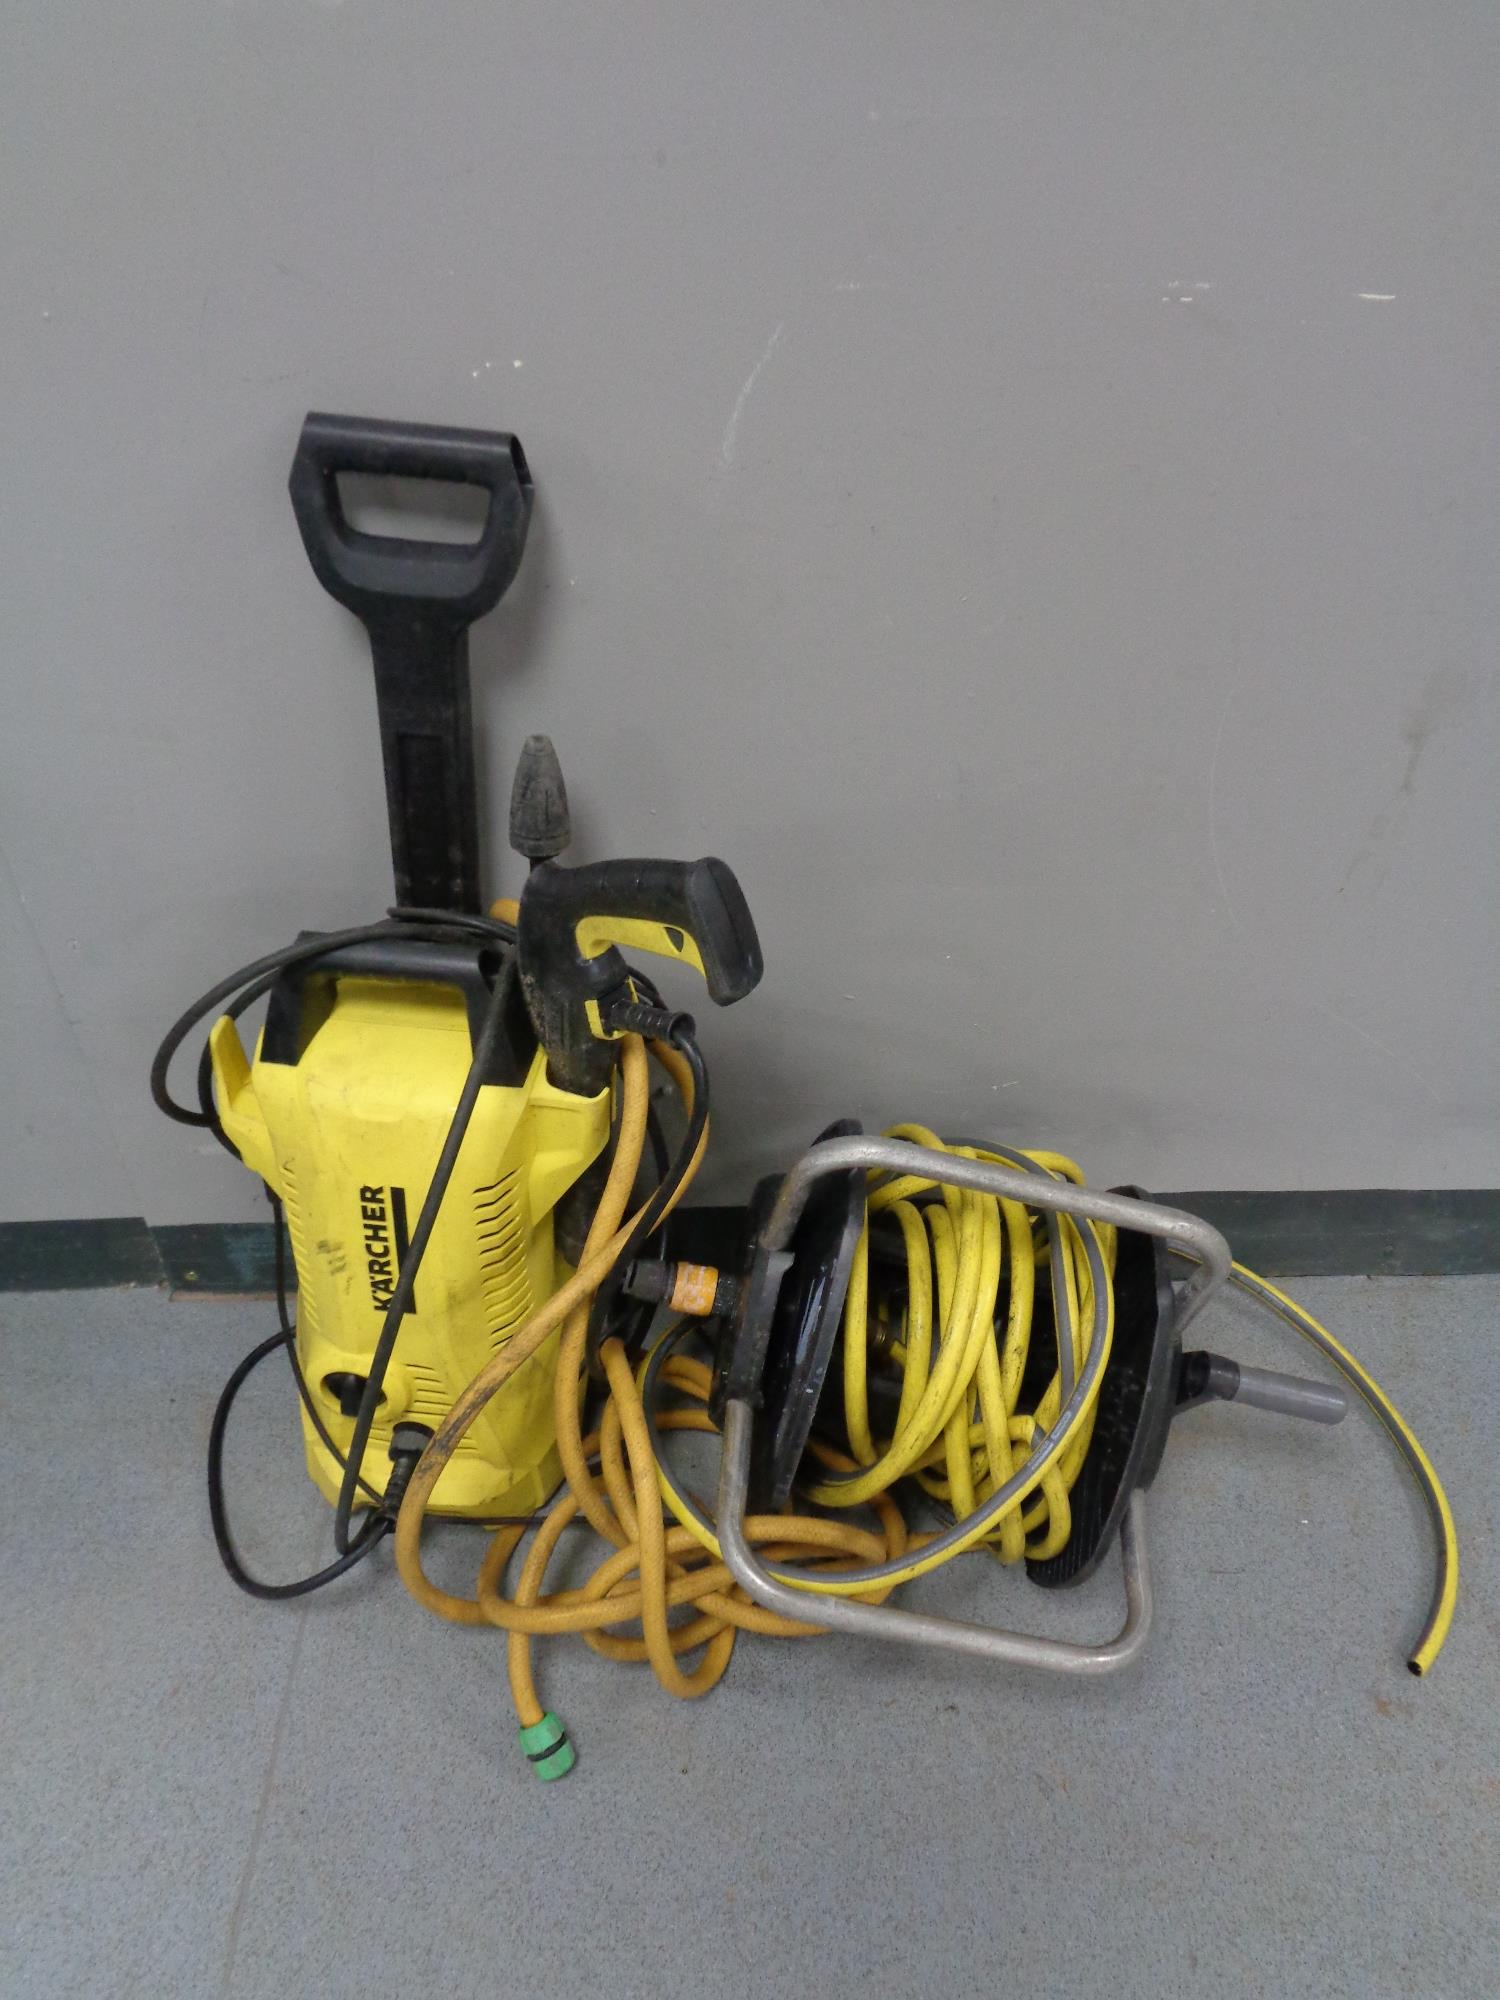 A Karcher pressure washer and a hose pipe on reel